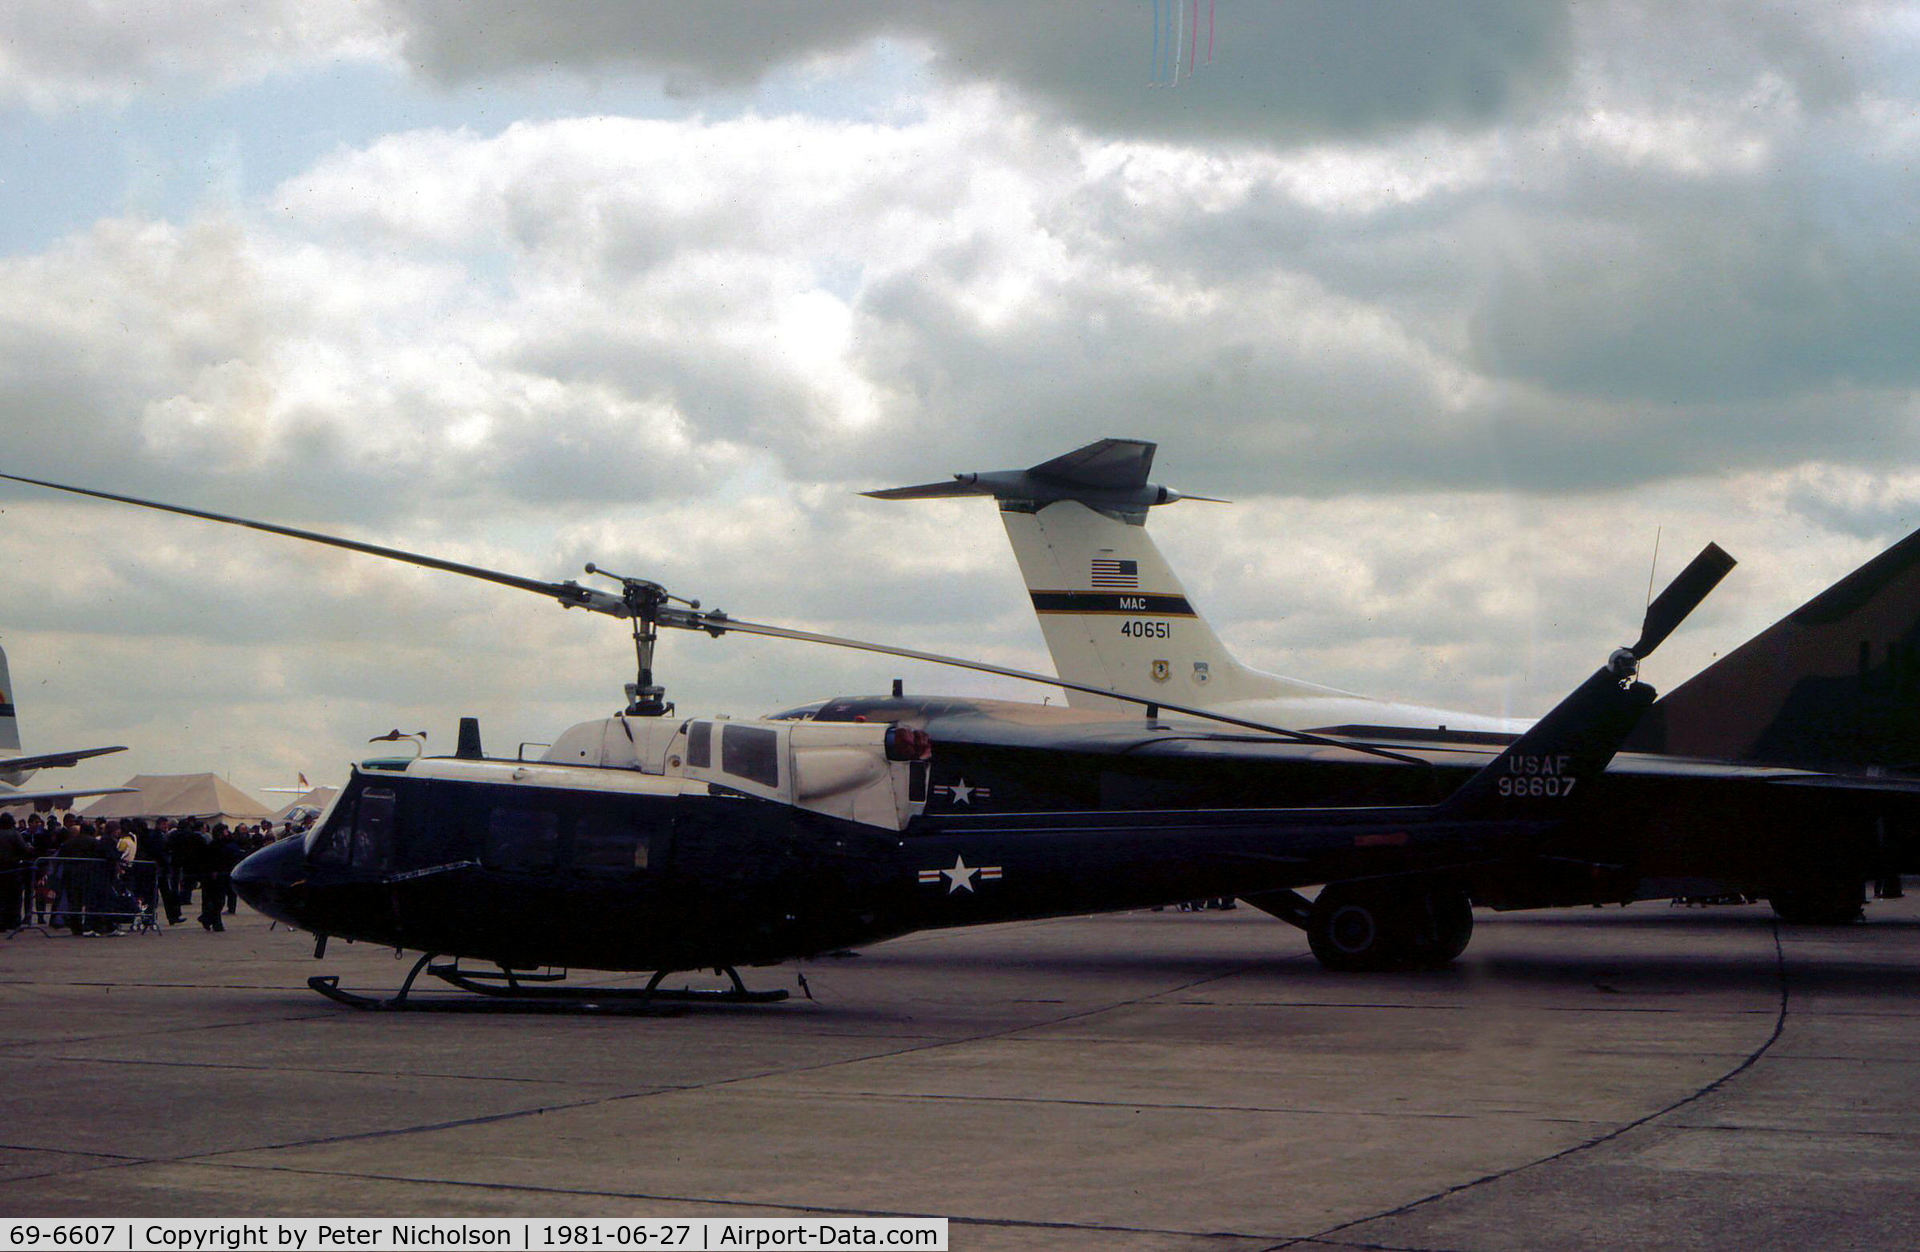 69-6607, 1969 Bell UH-1N Iroquois C/N 31013, UH-1N Iroquois of the 67th Air Rescue and Recovery Squadron based at RAF Woodbridge on display at the 1981 Intnl Air Tattoo at RAF Greenham Common.